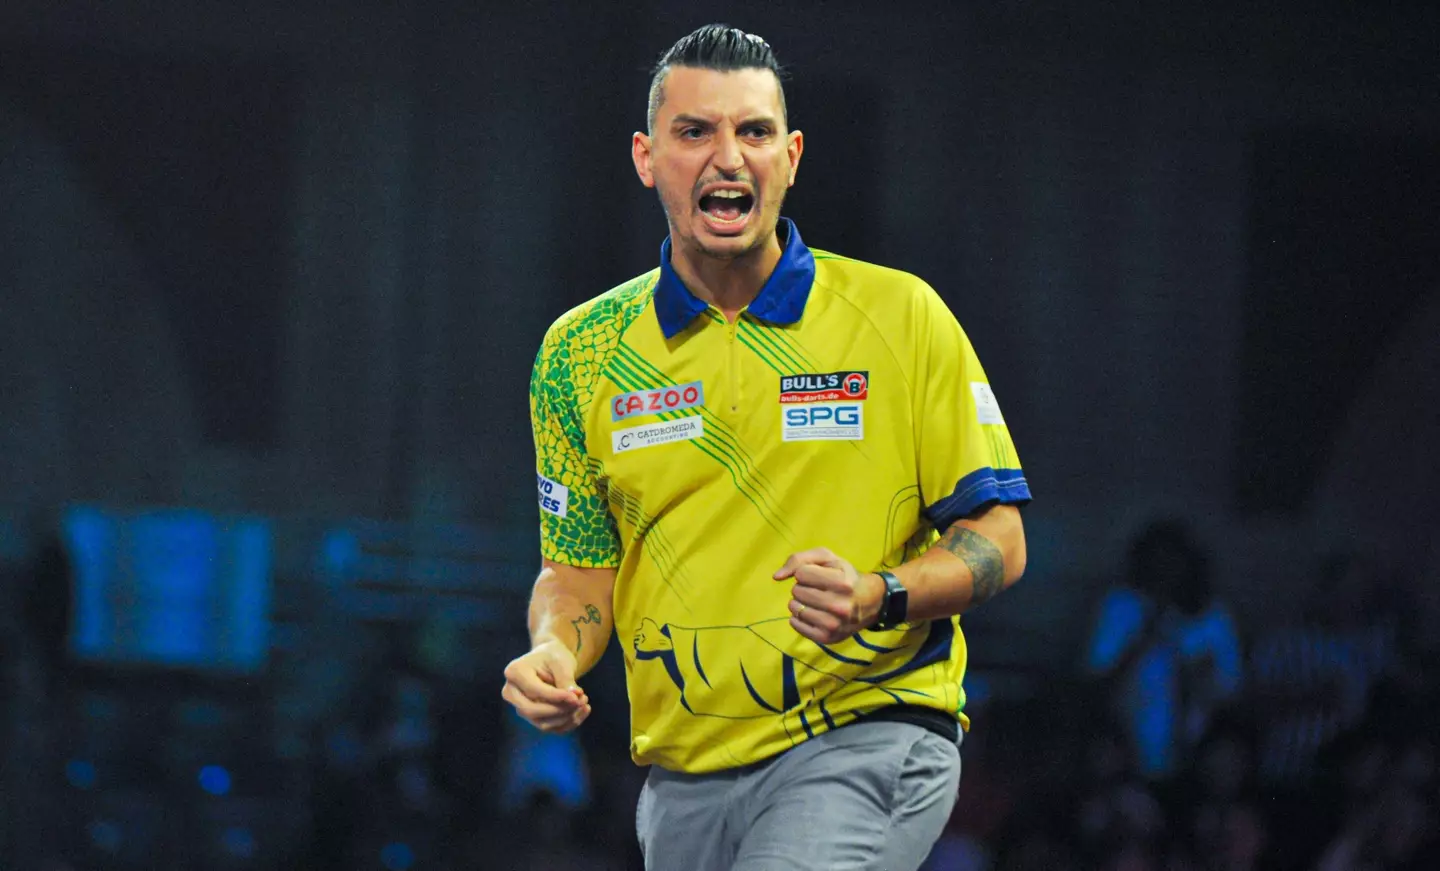 Portela appeared at the PDC World Darts Championship in December last year.